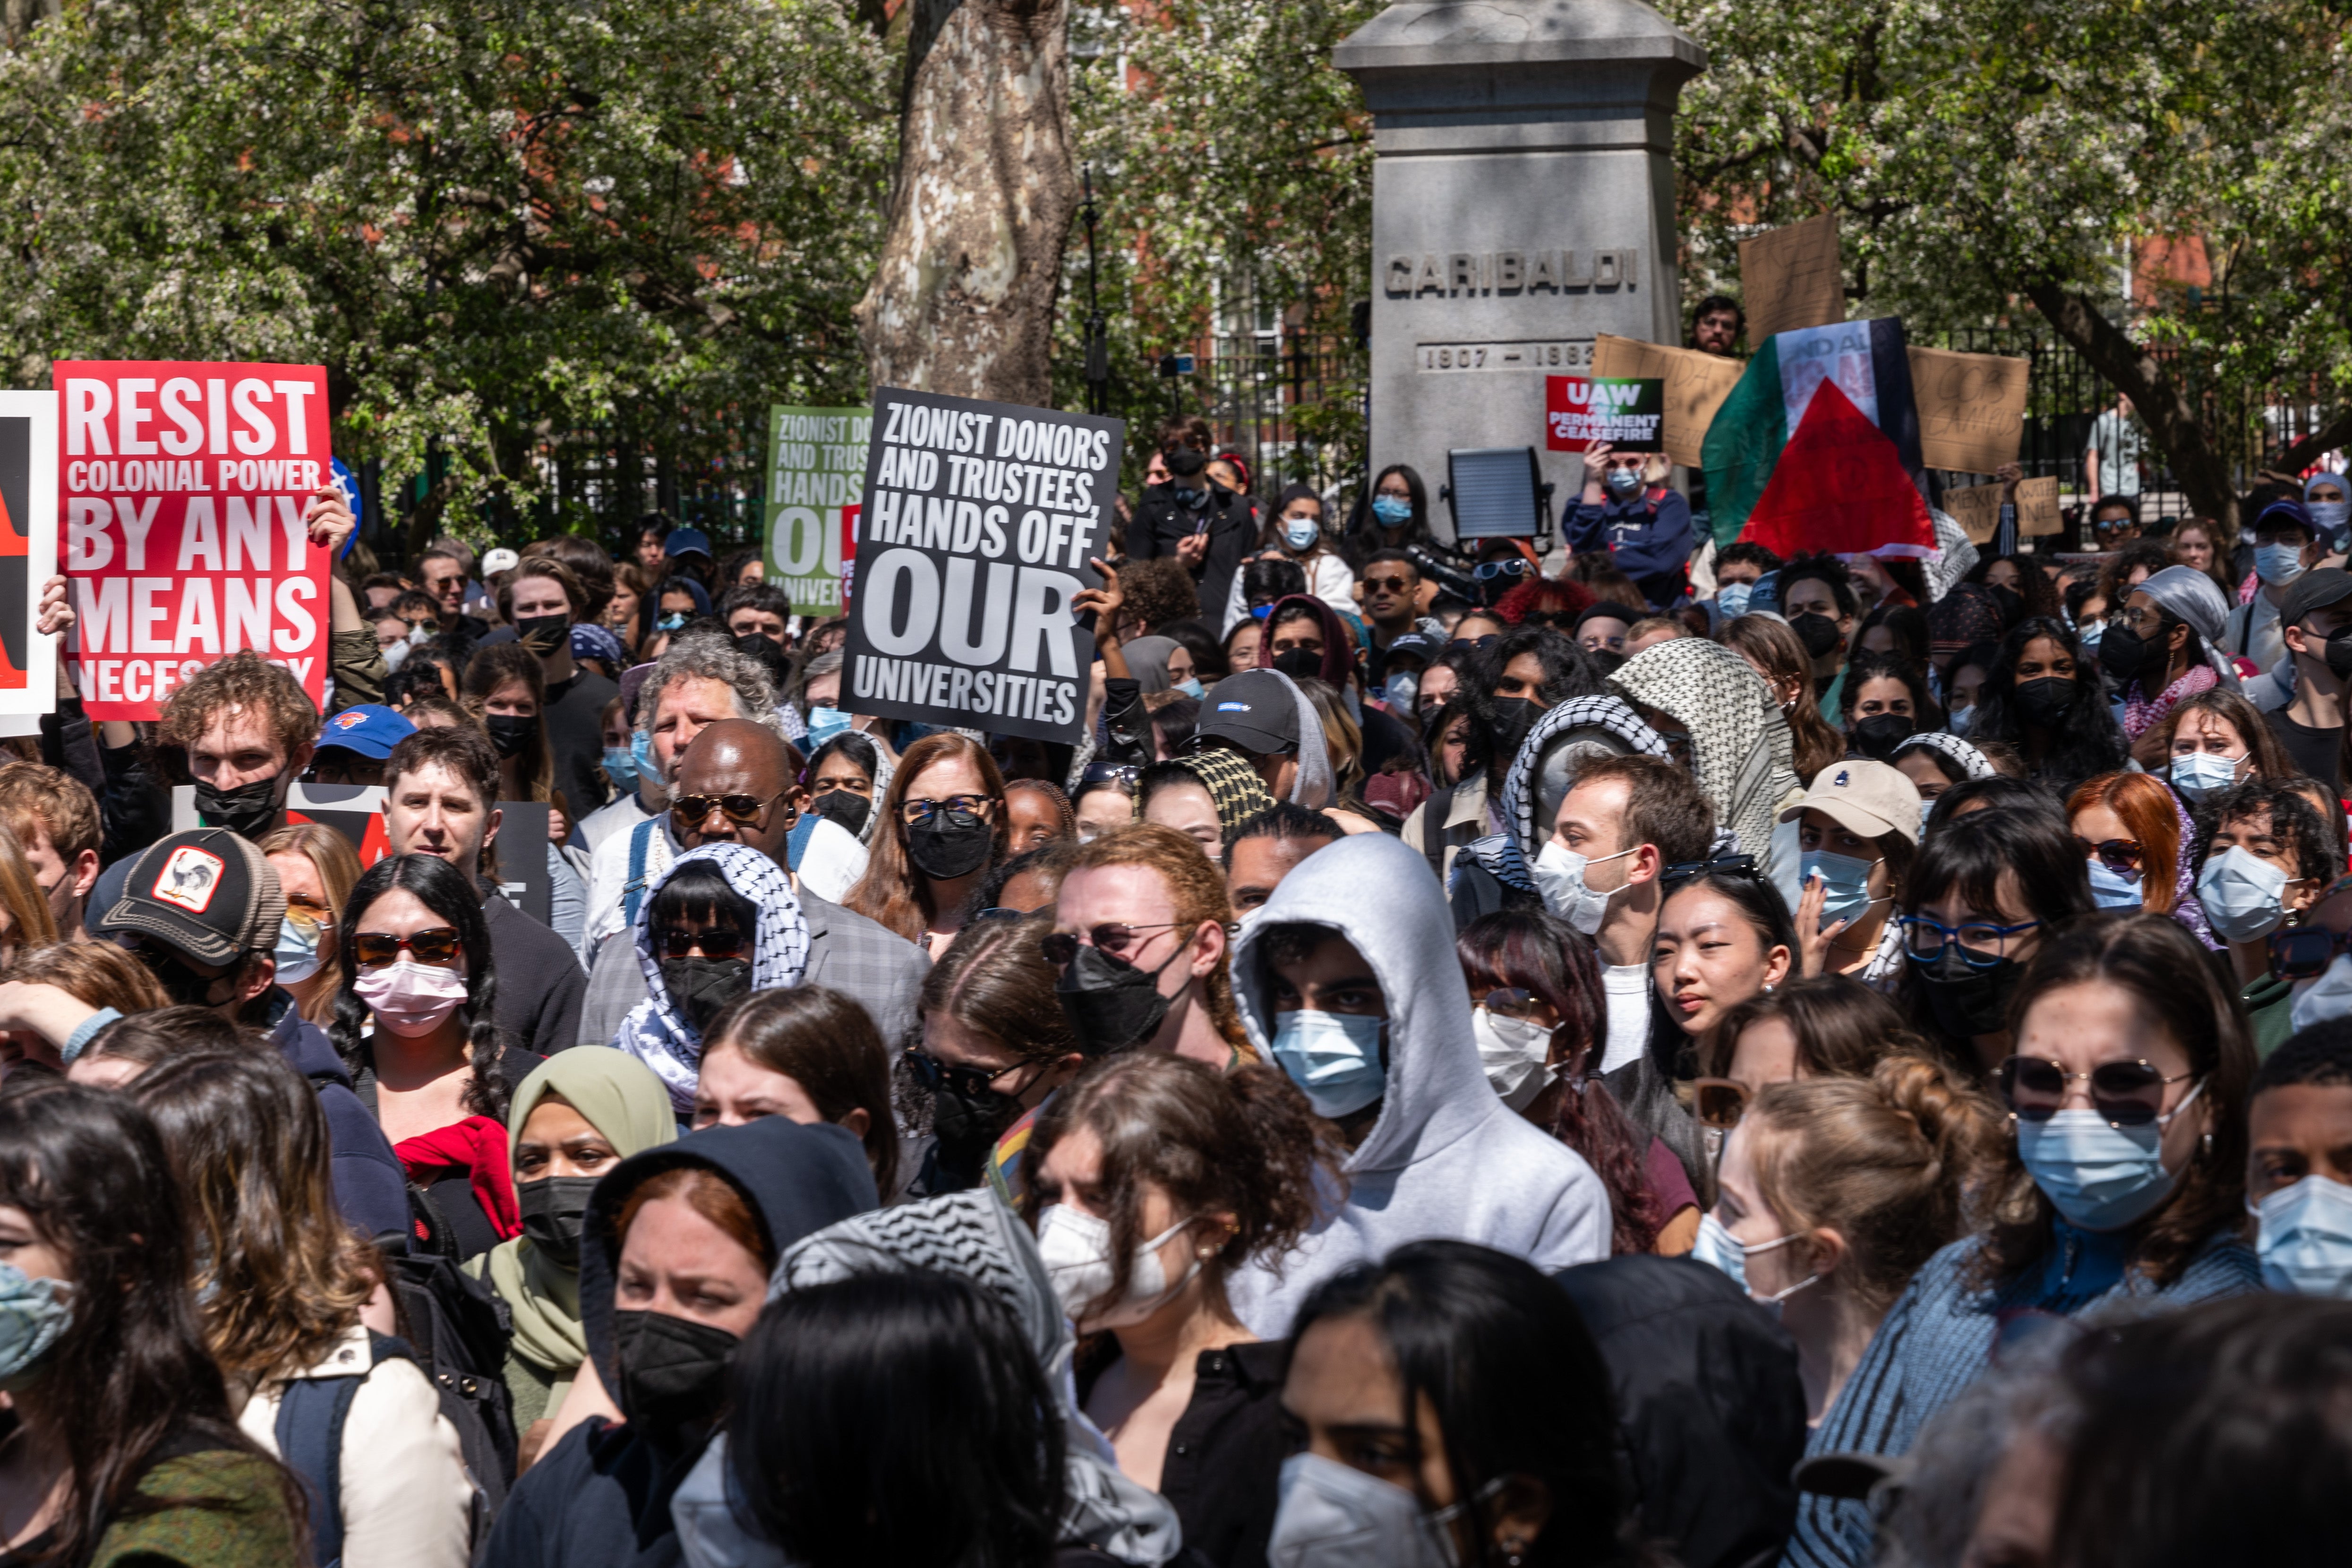 New York University (NYU) students and faculty participate in a pro-Palestinian protest at Washington Square Park on 23 April. Police arrested some 150 people the previous day